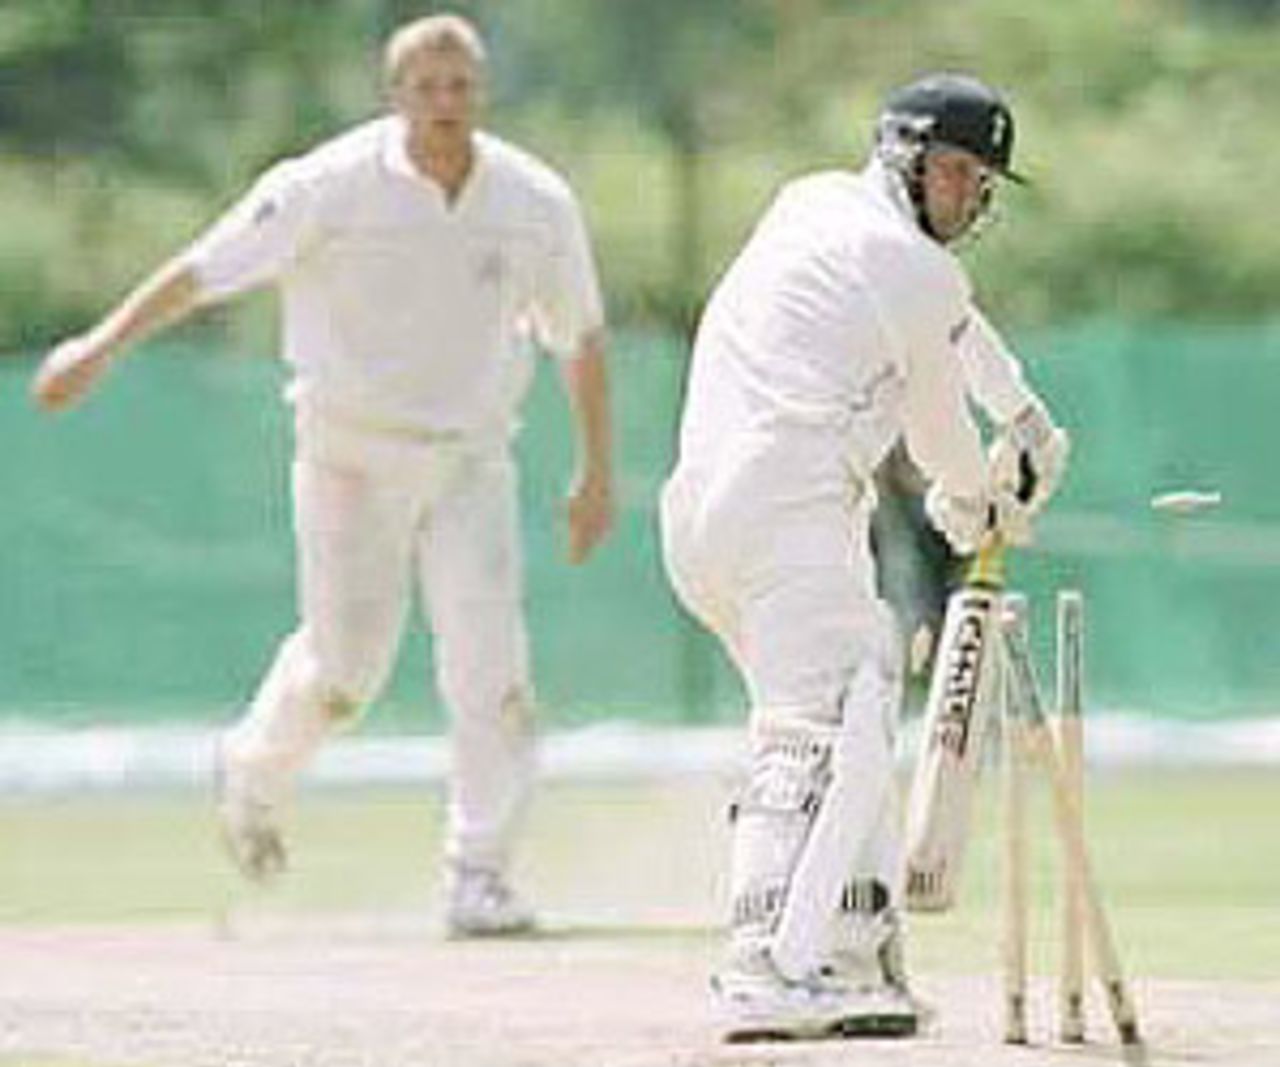 Simon Renshaw looks back to see his stumps shattered by Flintoff, PPP healthcare County Championship Division One, 2000, Lancashire v Hampshire, Aigburth, Liverpool, 06-09 June 2000 (Day 3).